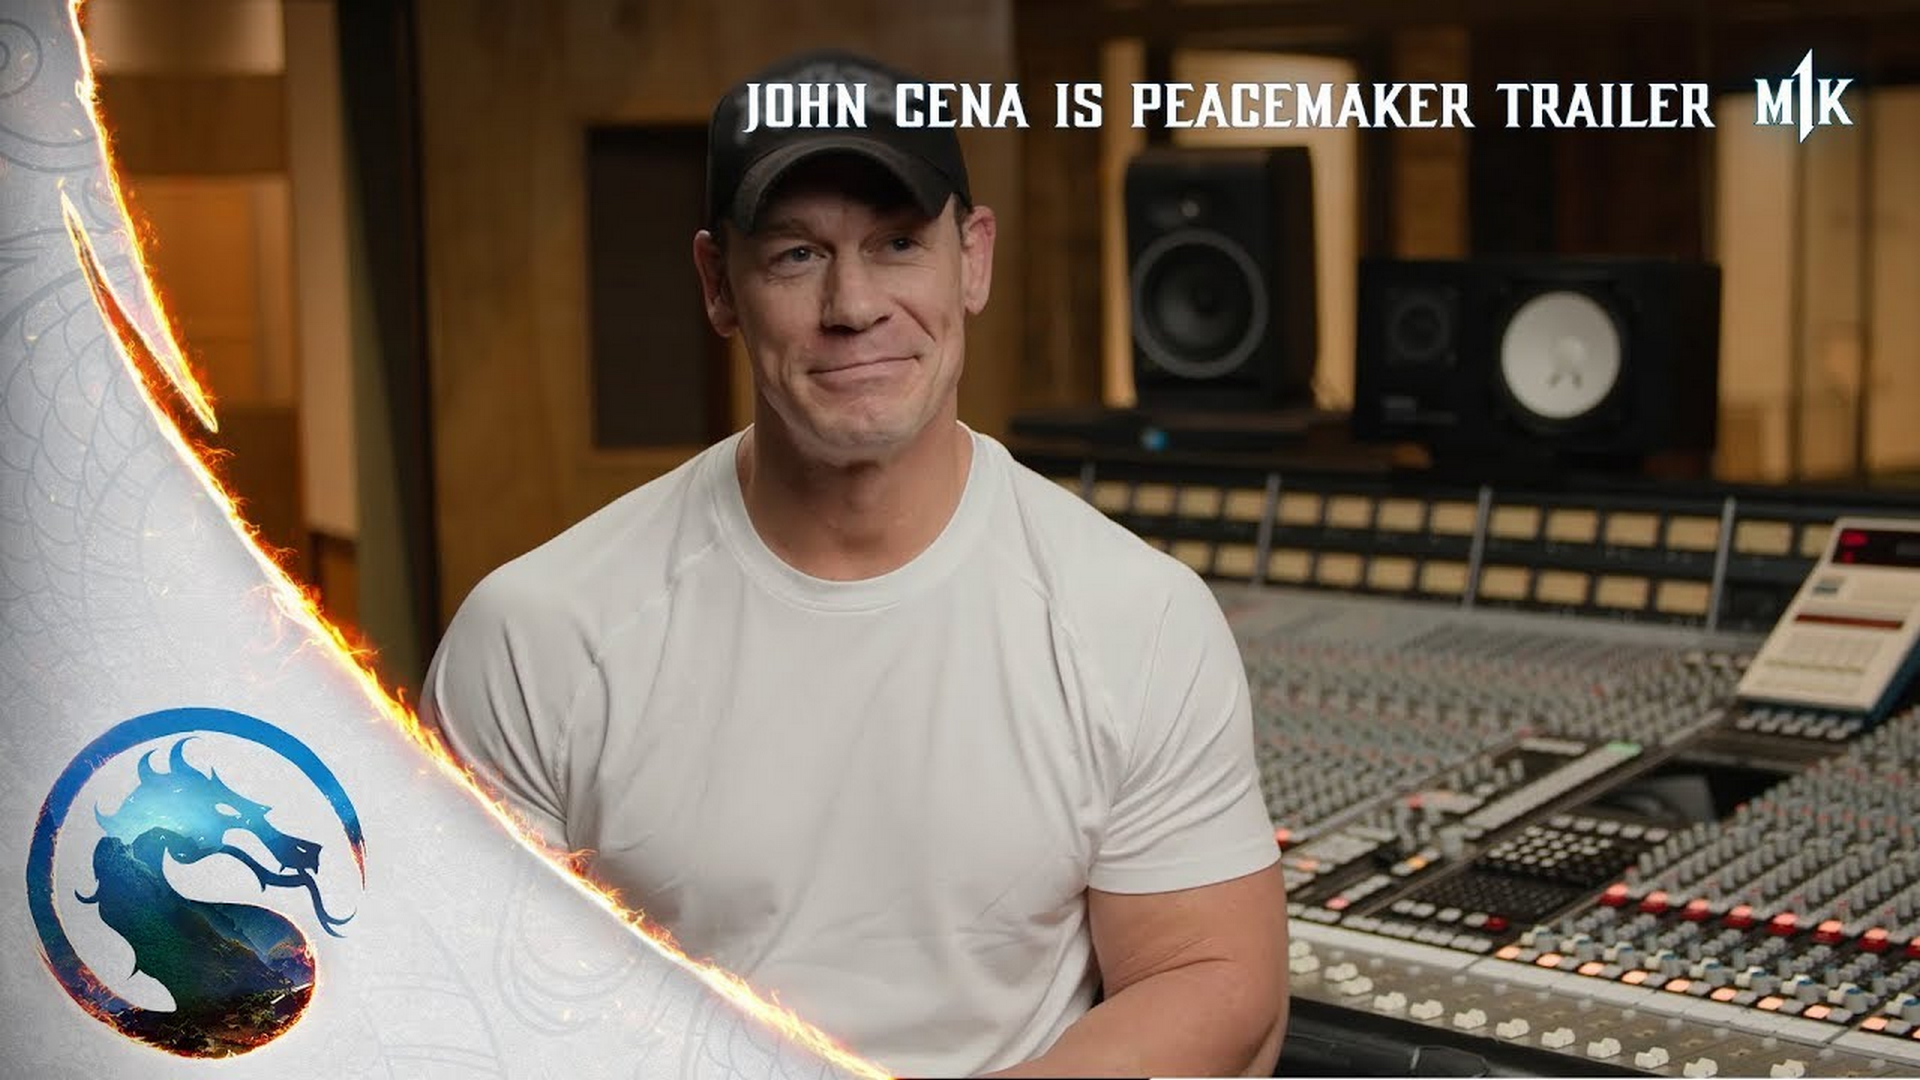 New Mortal Kombat 1 Trailer Features Actor John Cena Discussing DC’s Peacemaker As Latest Guest Fighter